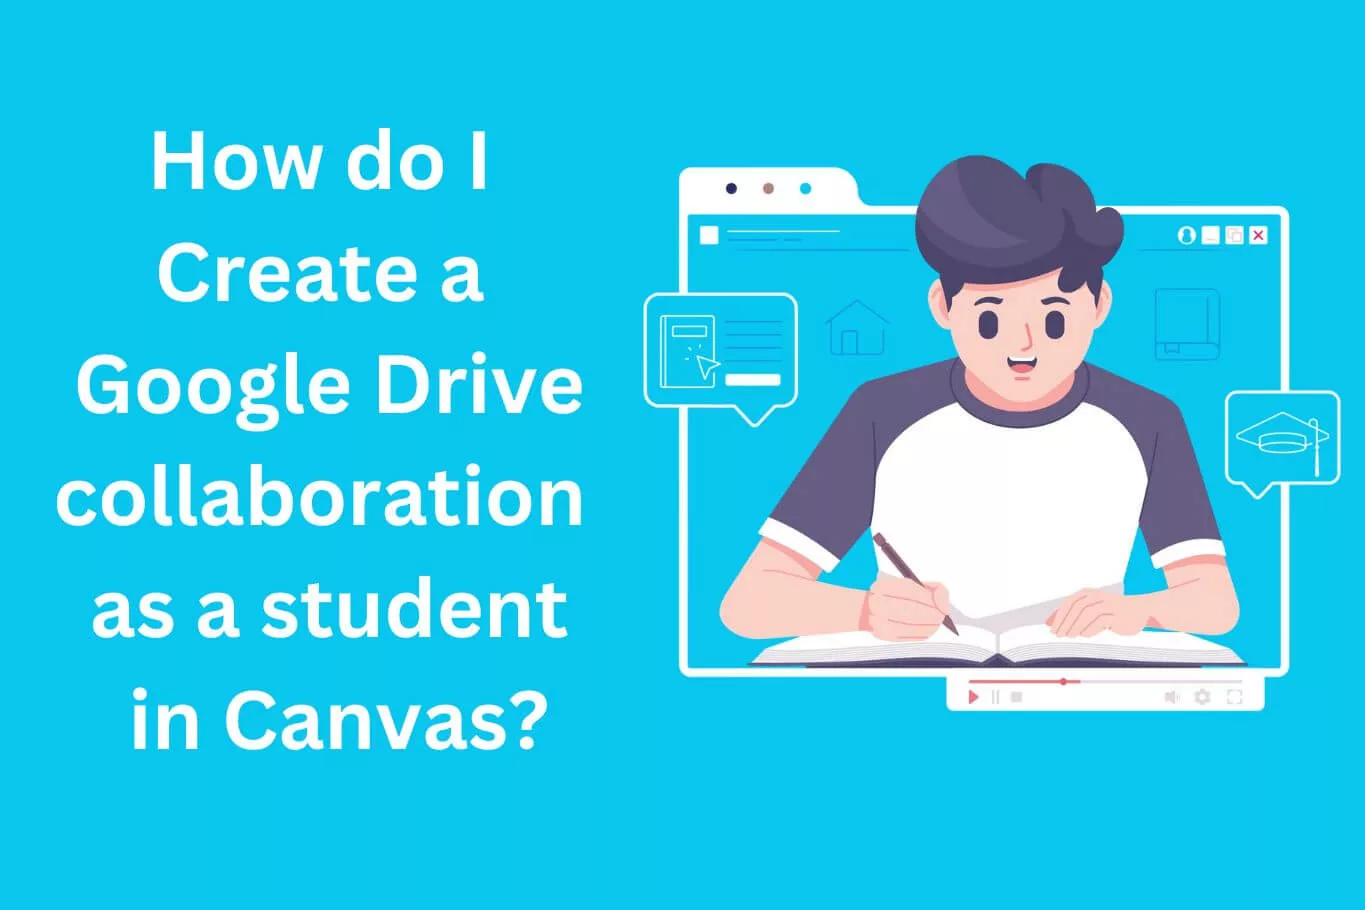 How do I Create a Google Drive collaboration as a student in Canvas?